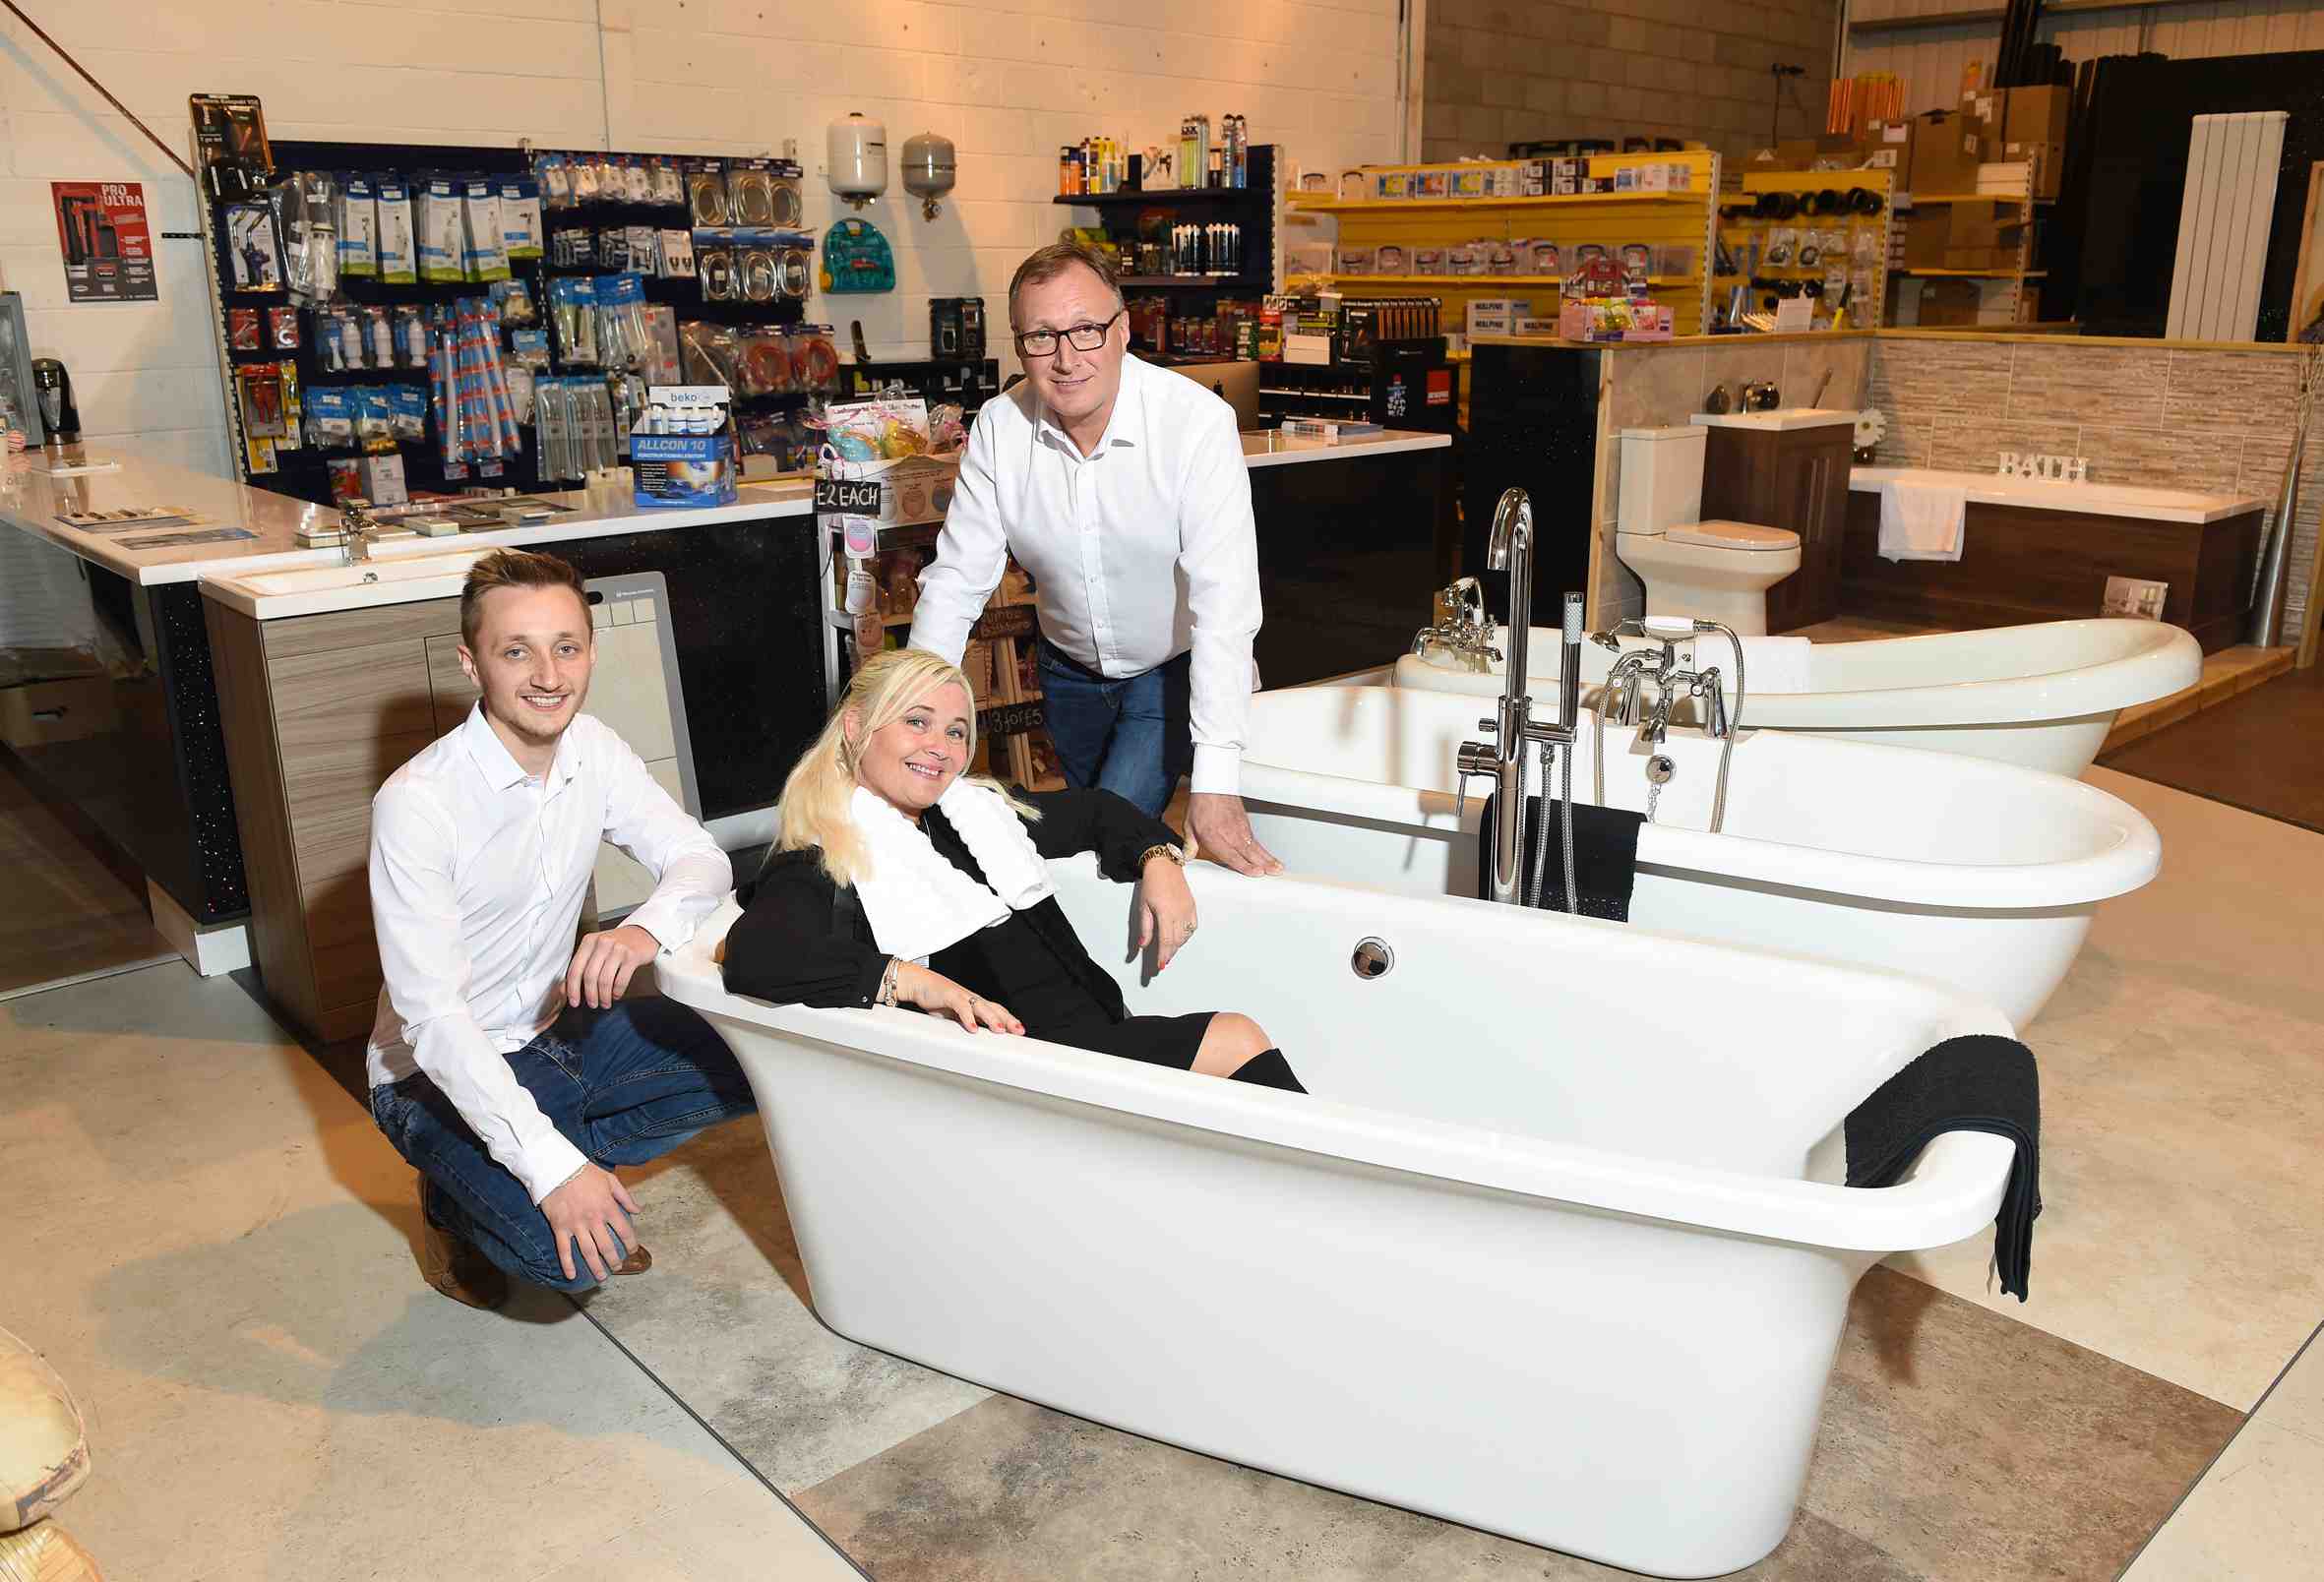 Image: New plumbing and bathroom firm hoping to make a splash